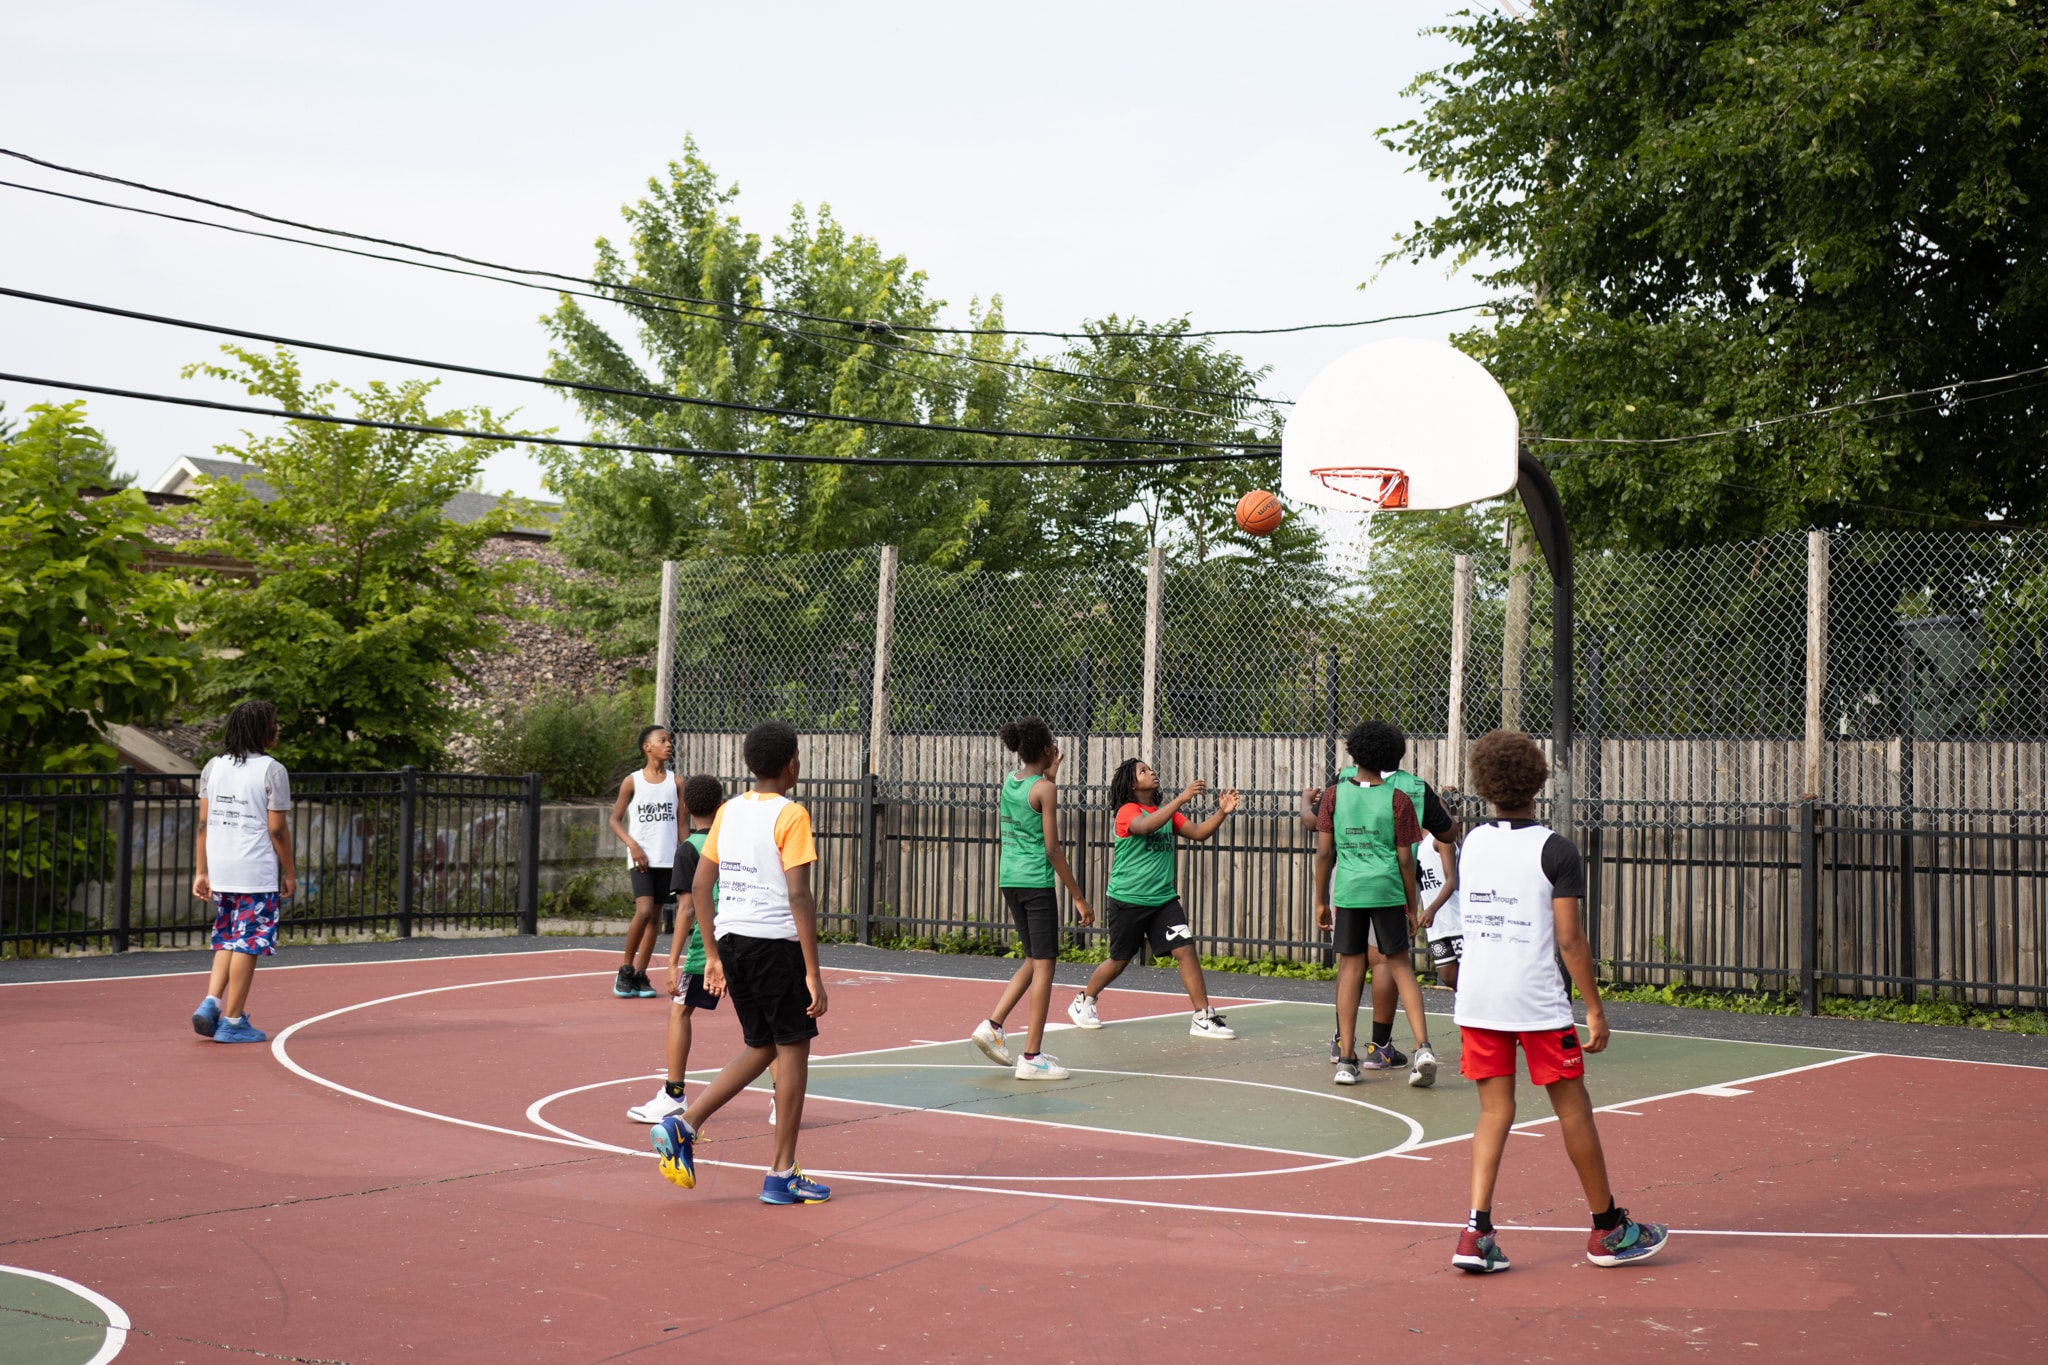 HomeCourt youth playing on basketball court